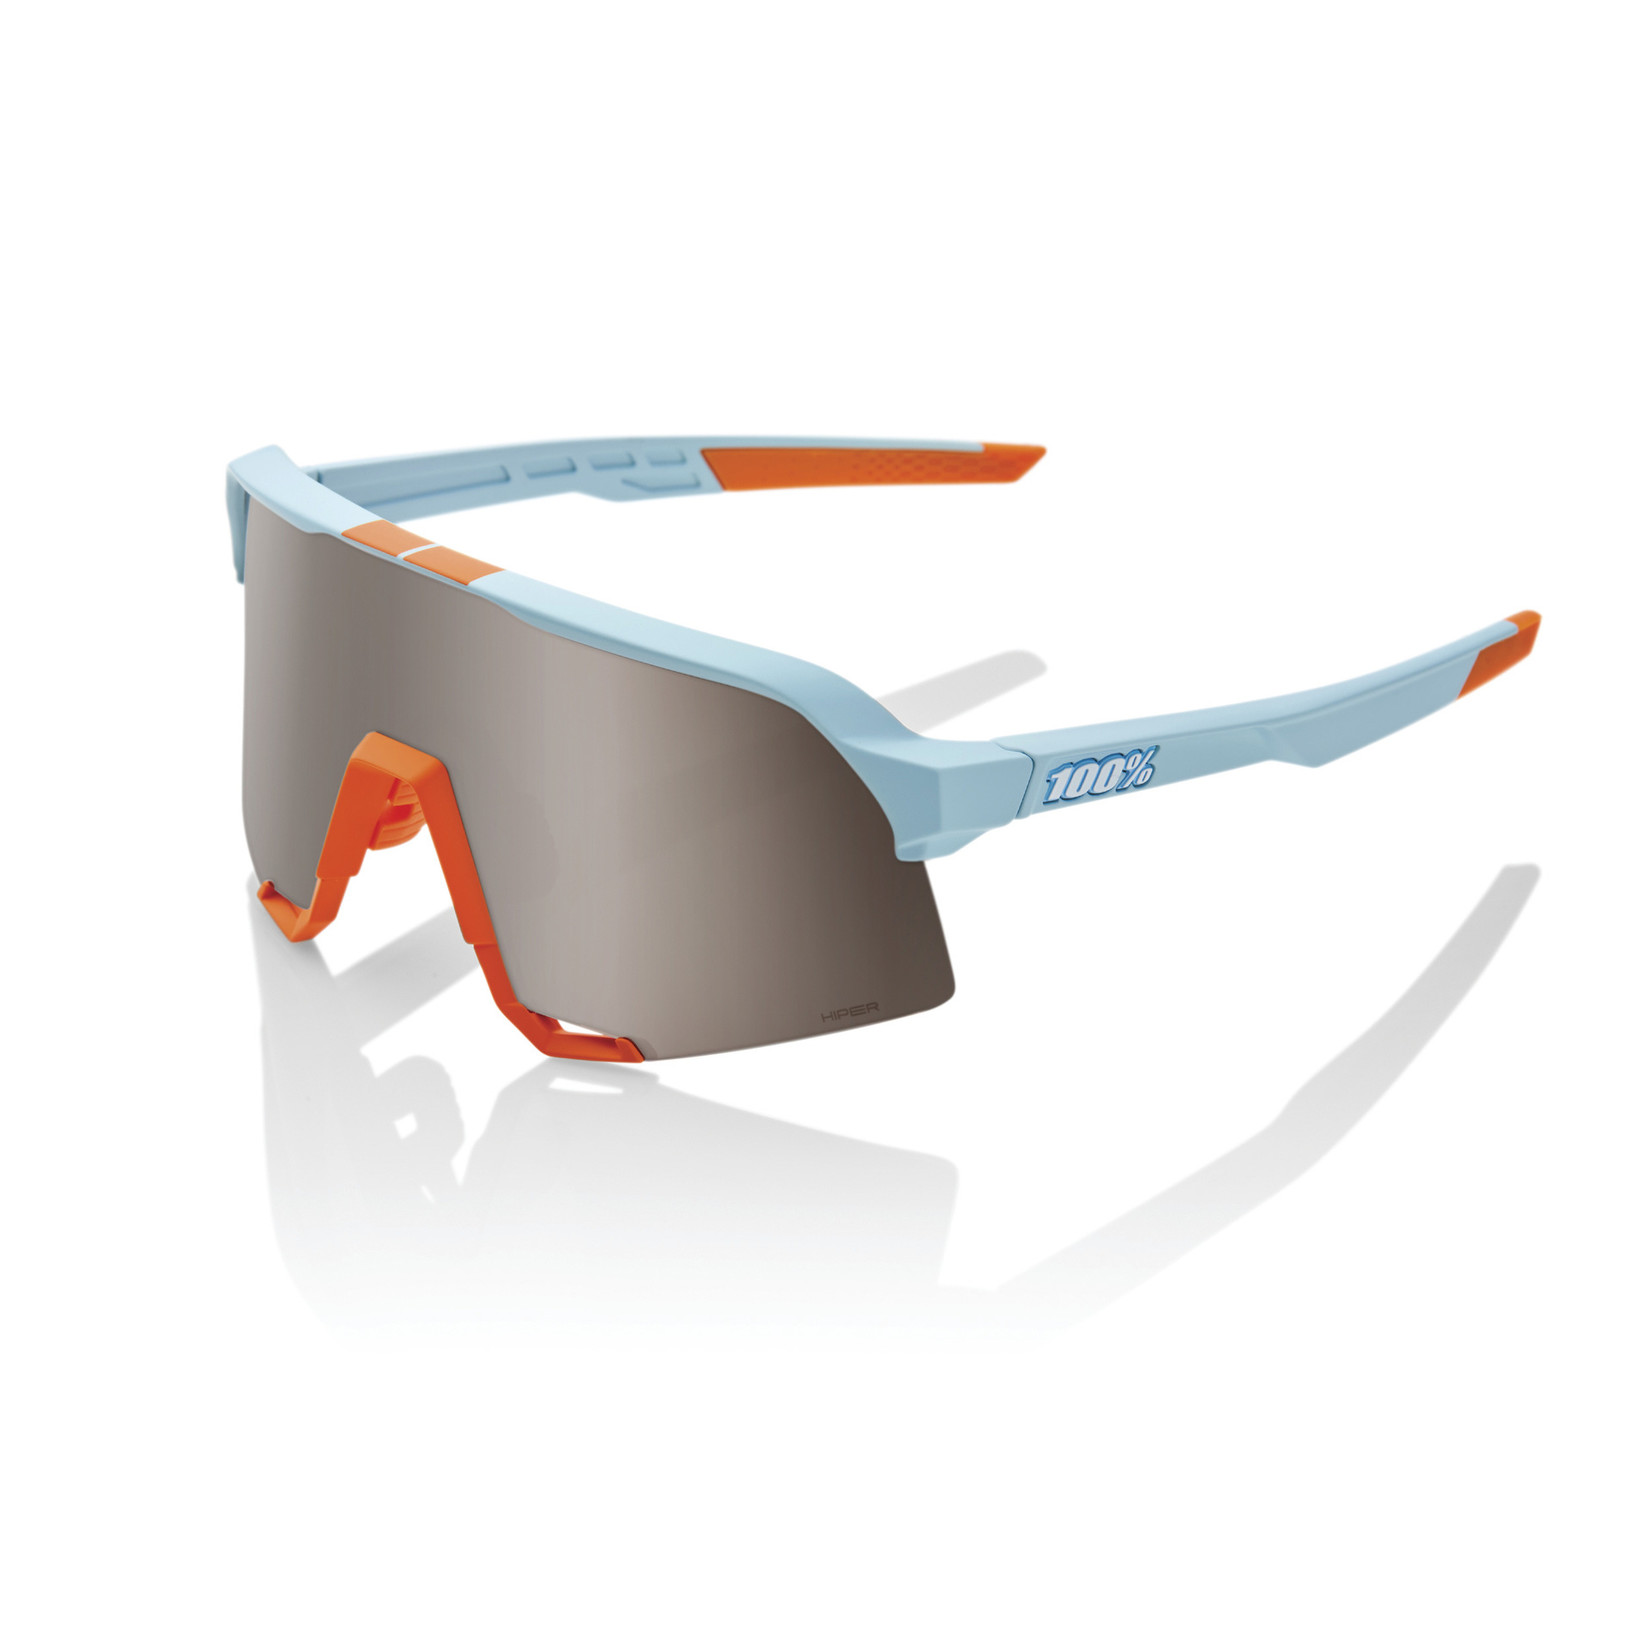 100% S3 Sunglasses, Soft Tact Two Tone frame - HiPER Silver Mirror Lens